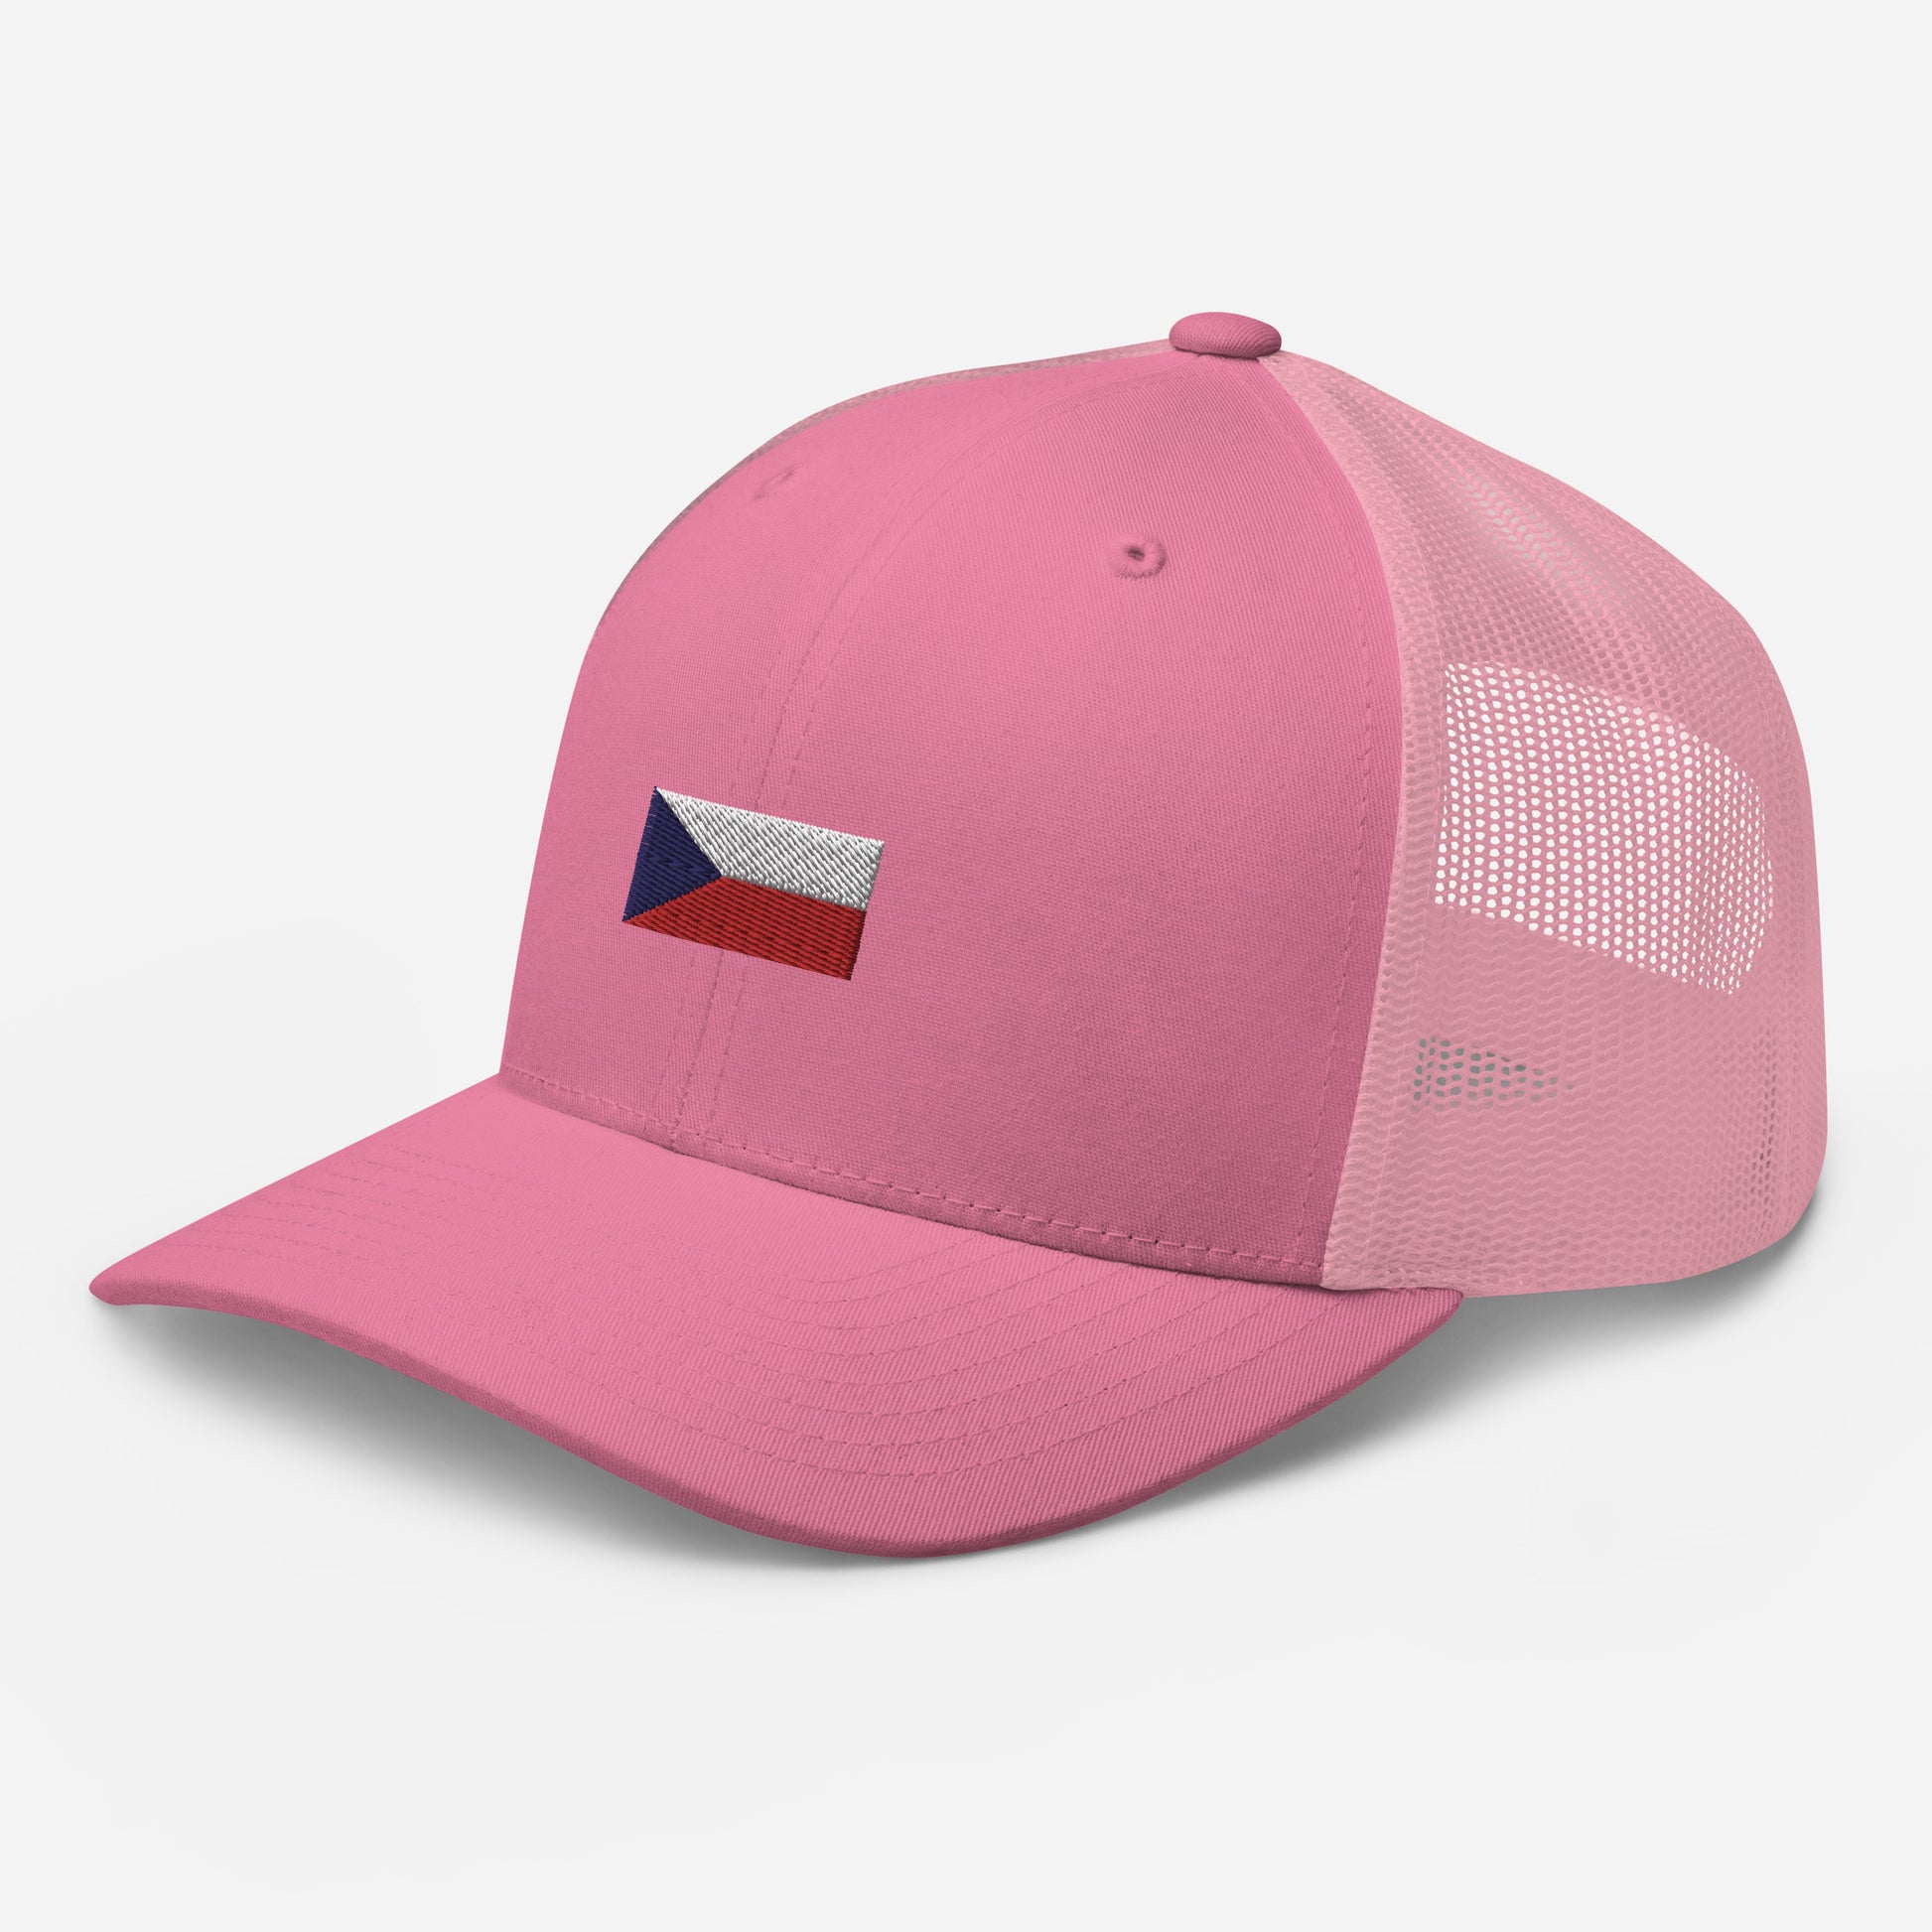 cap-from-the-front-with-czech-flag